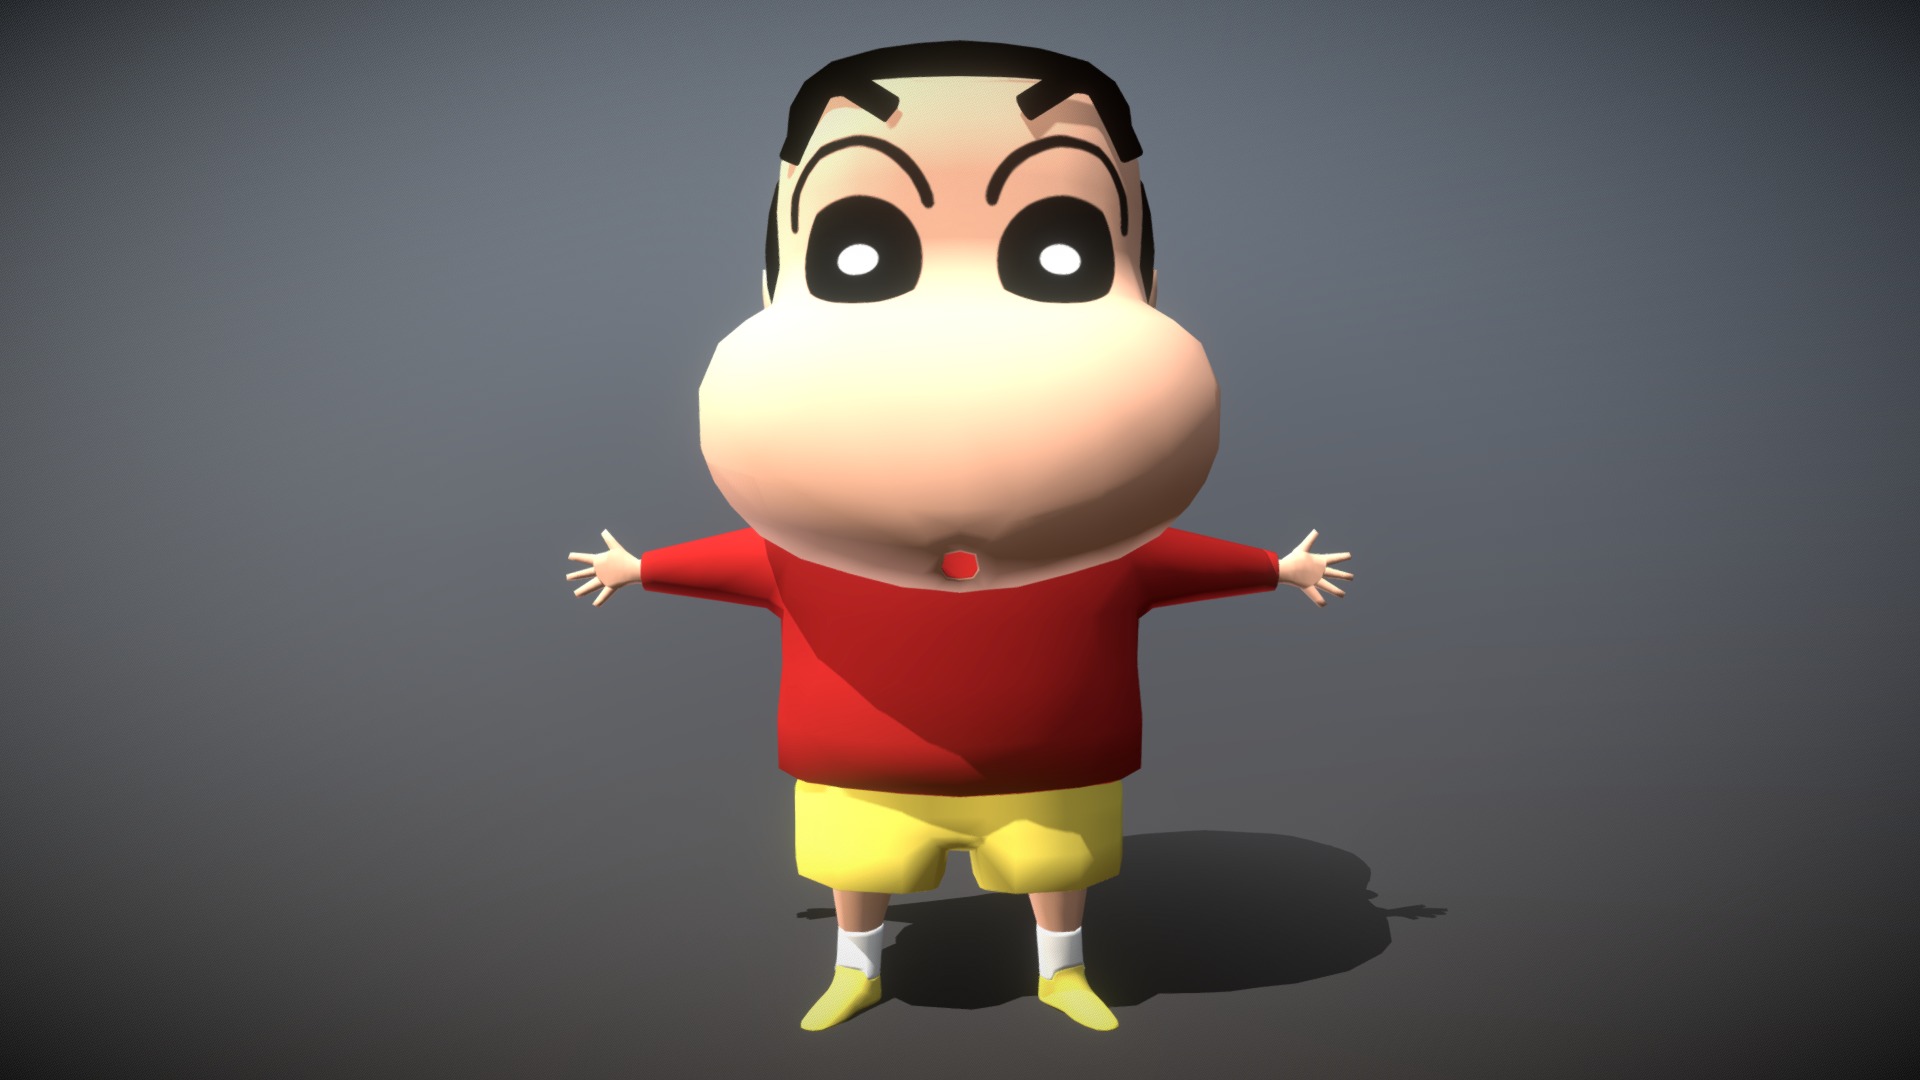 3D model Crayon Shin Chan - This is a 3D model of the Crayon Shin Chan. The 3D model is about a toy figurine of a person.